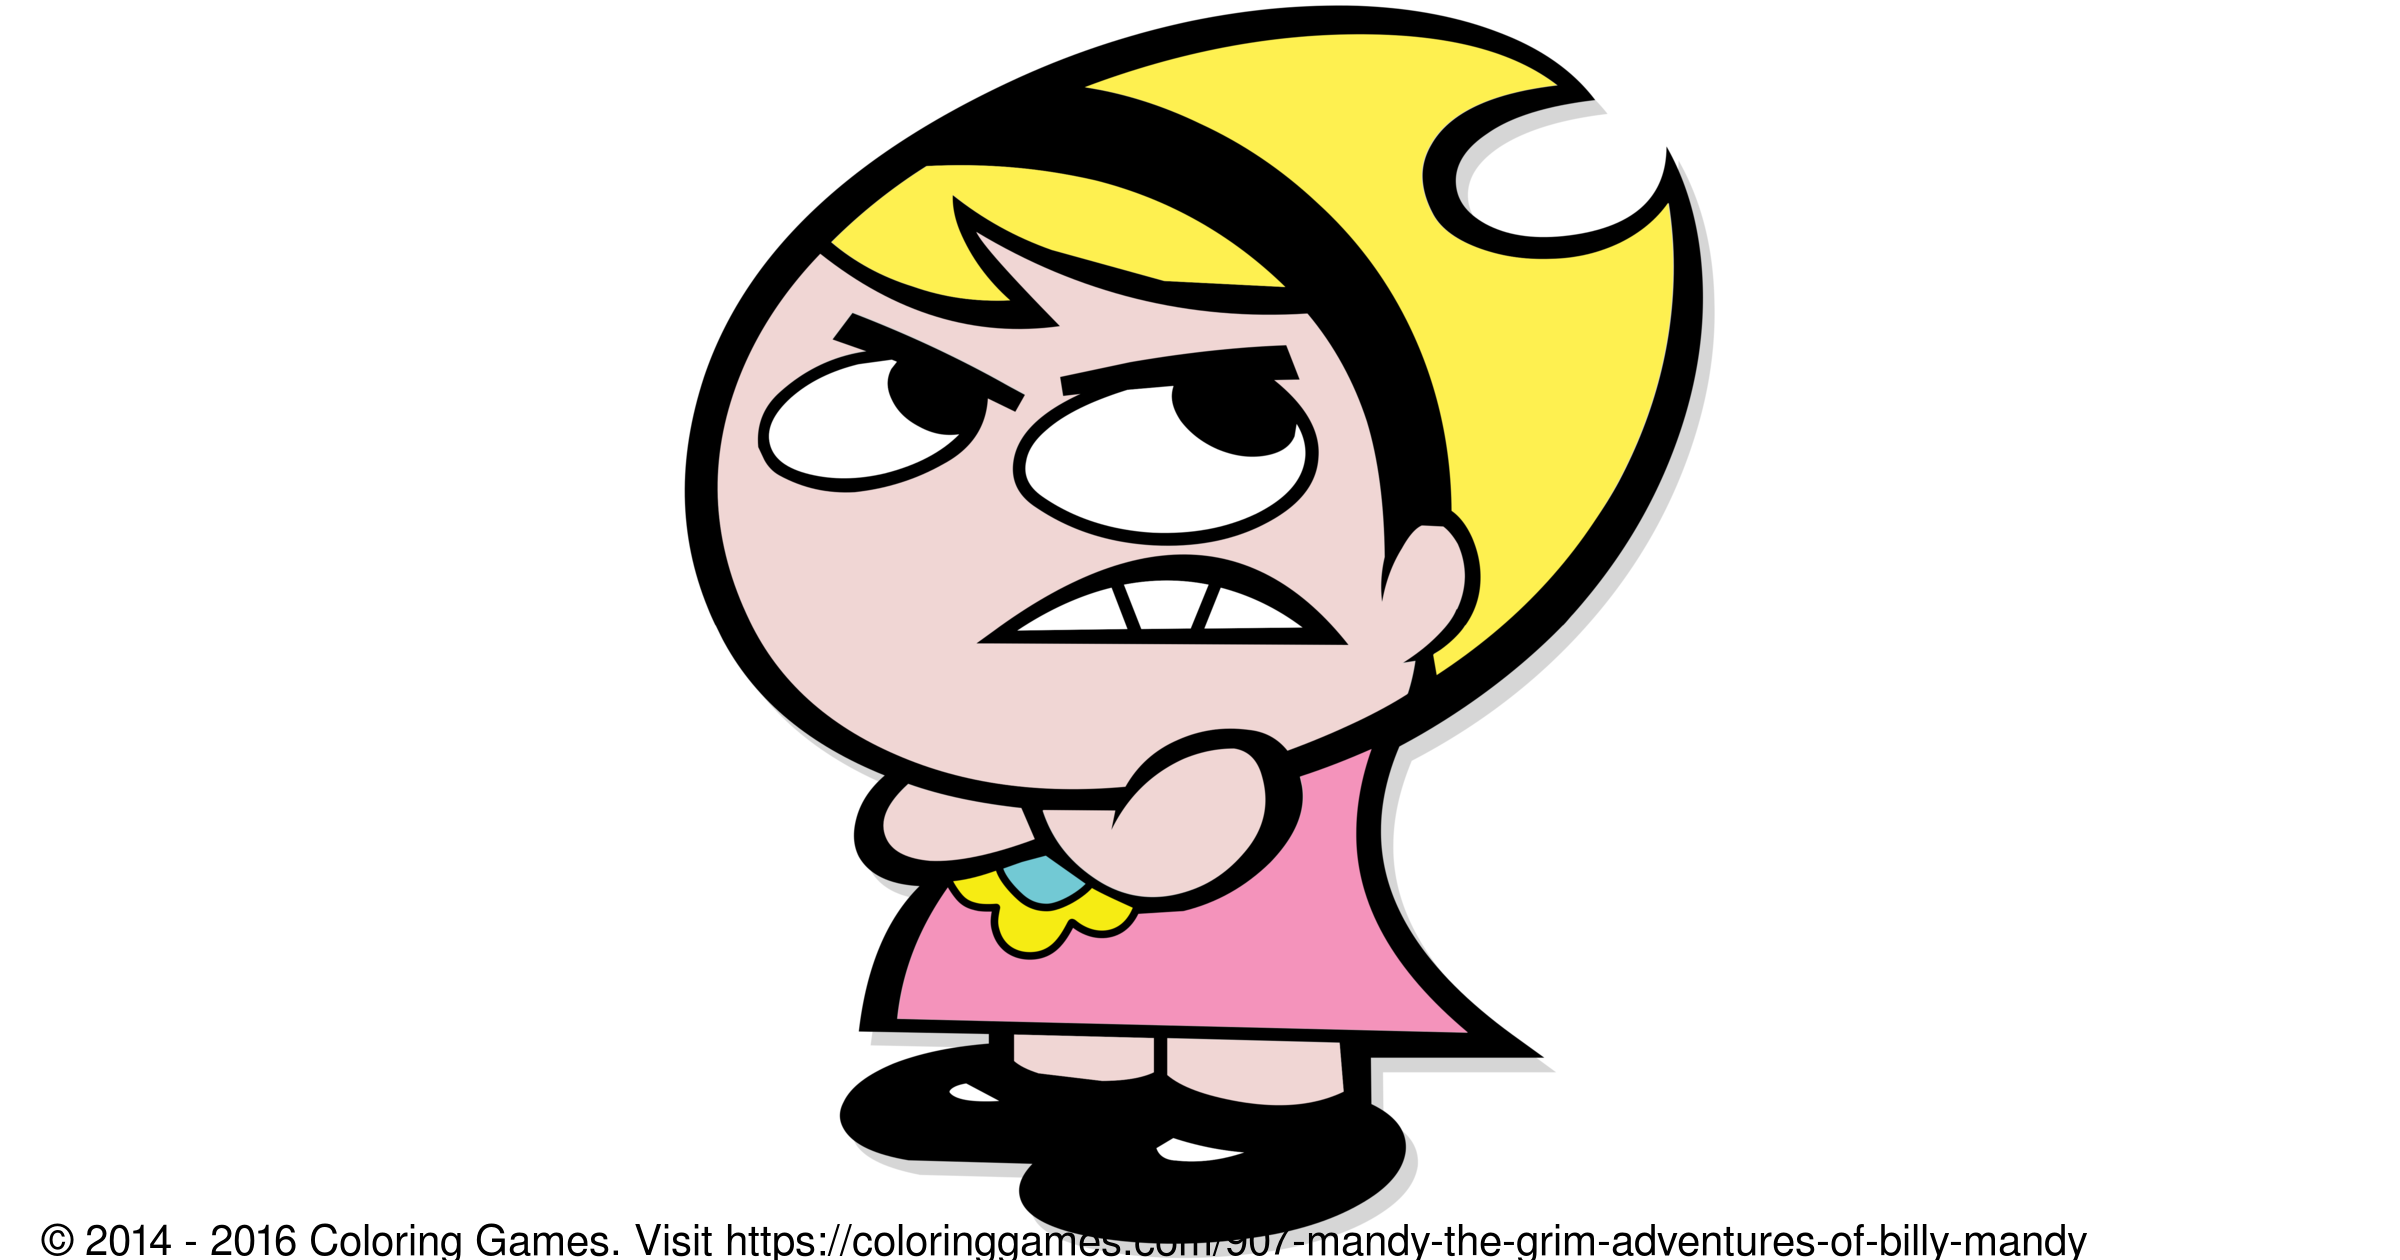 Mandy (The Grim Adventures of Billy & Mandy) - Coloring Games and Col.....